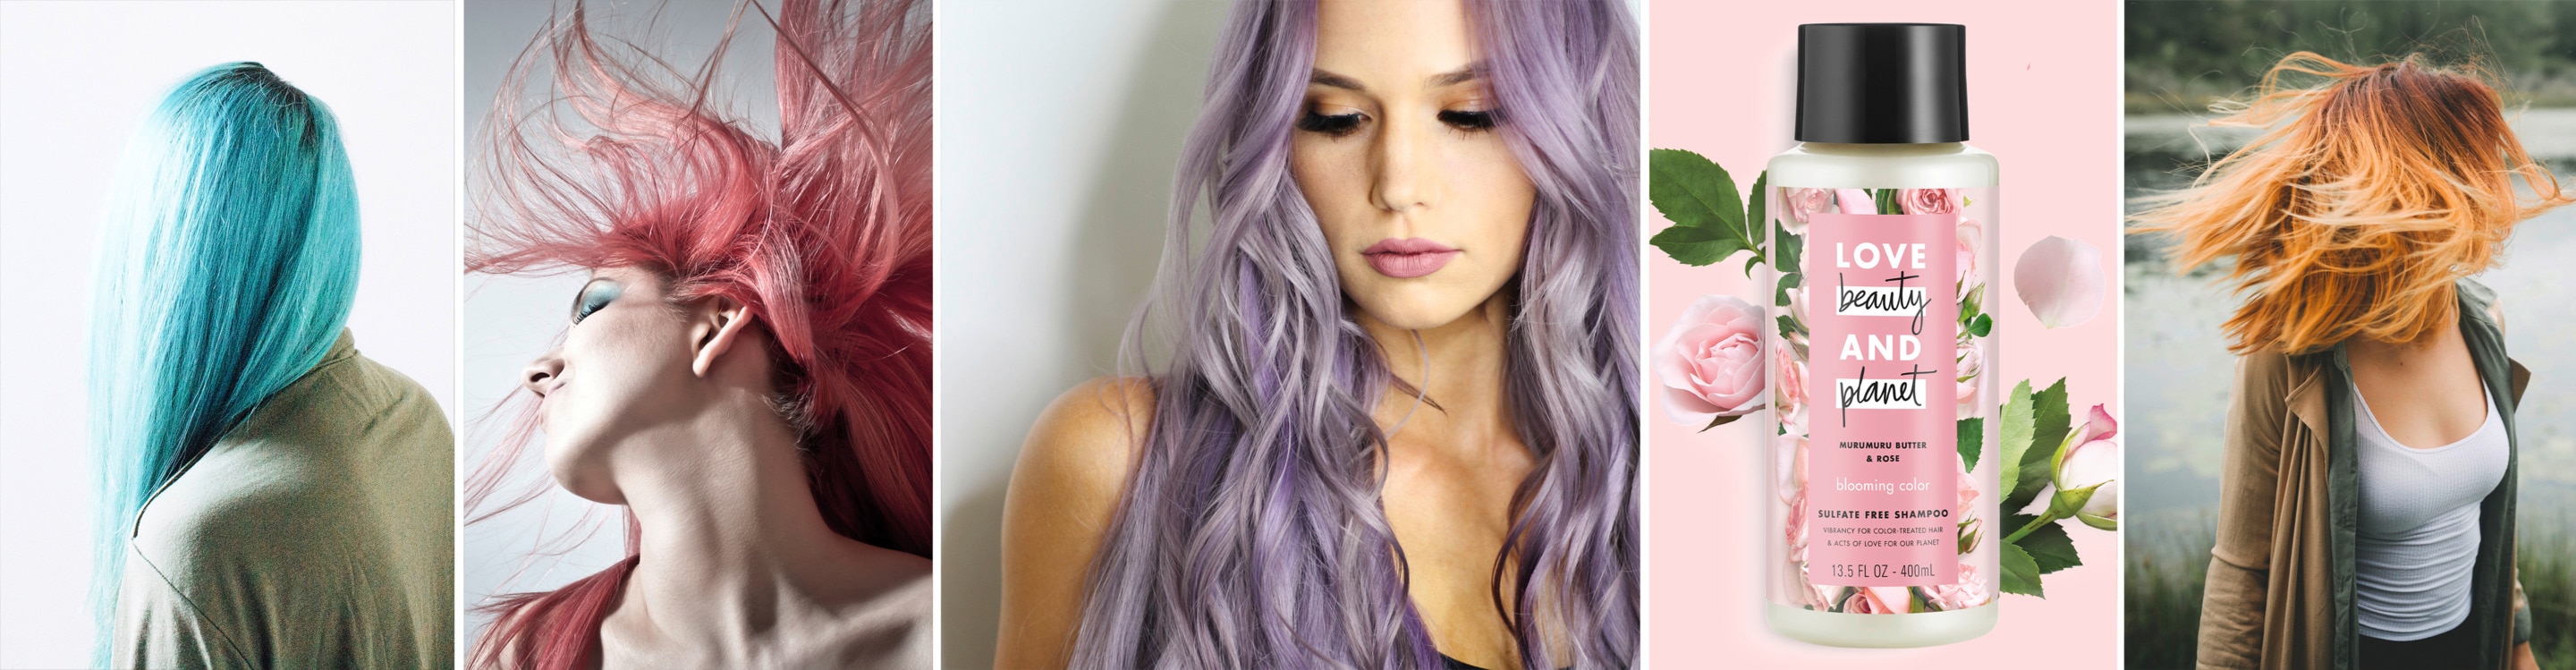 Images of Colored Hair and Love Beauty and Planet Blooming Color Shampoo